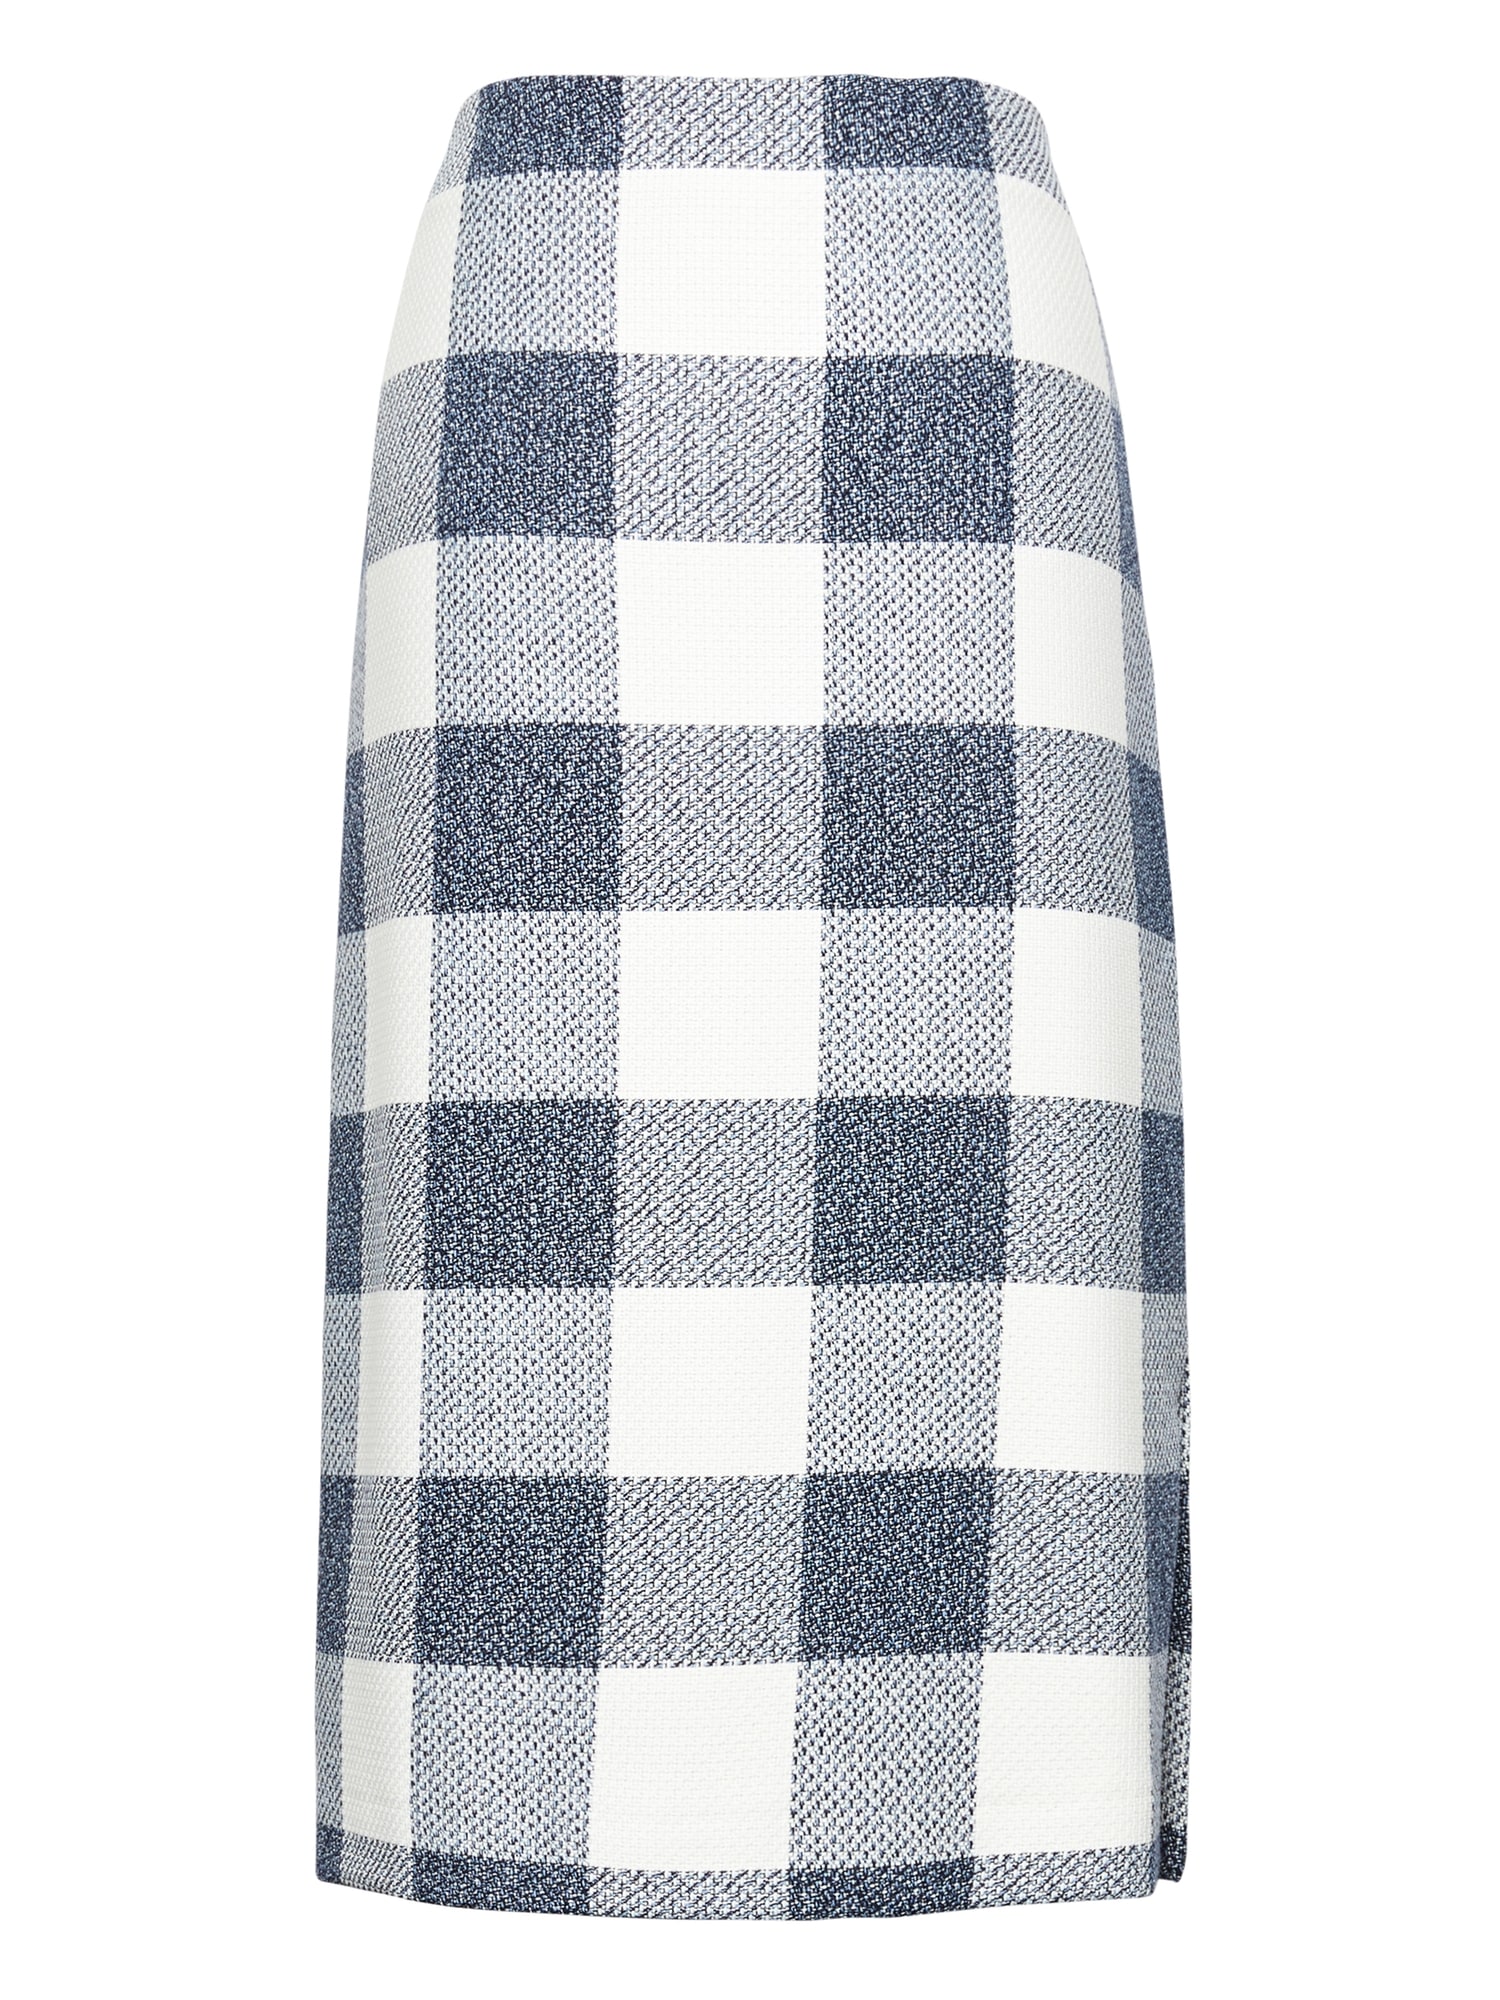 Petite Gingham Pencil Skirt with Side Slit